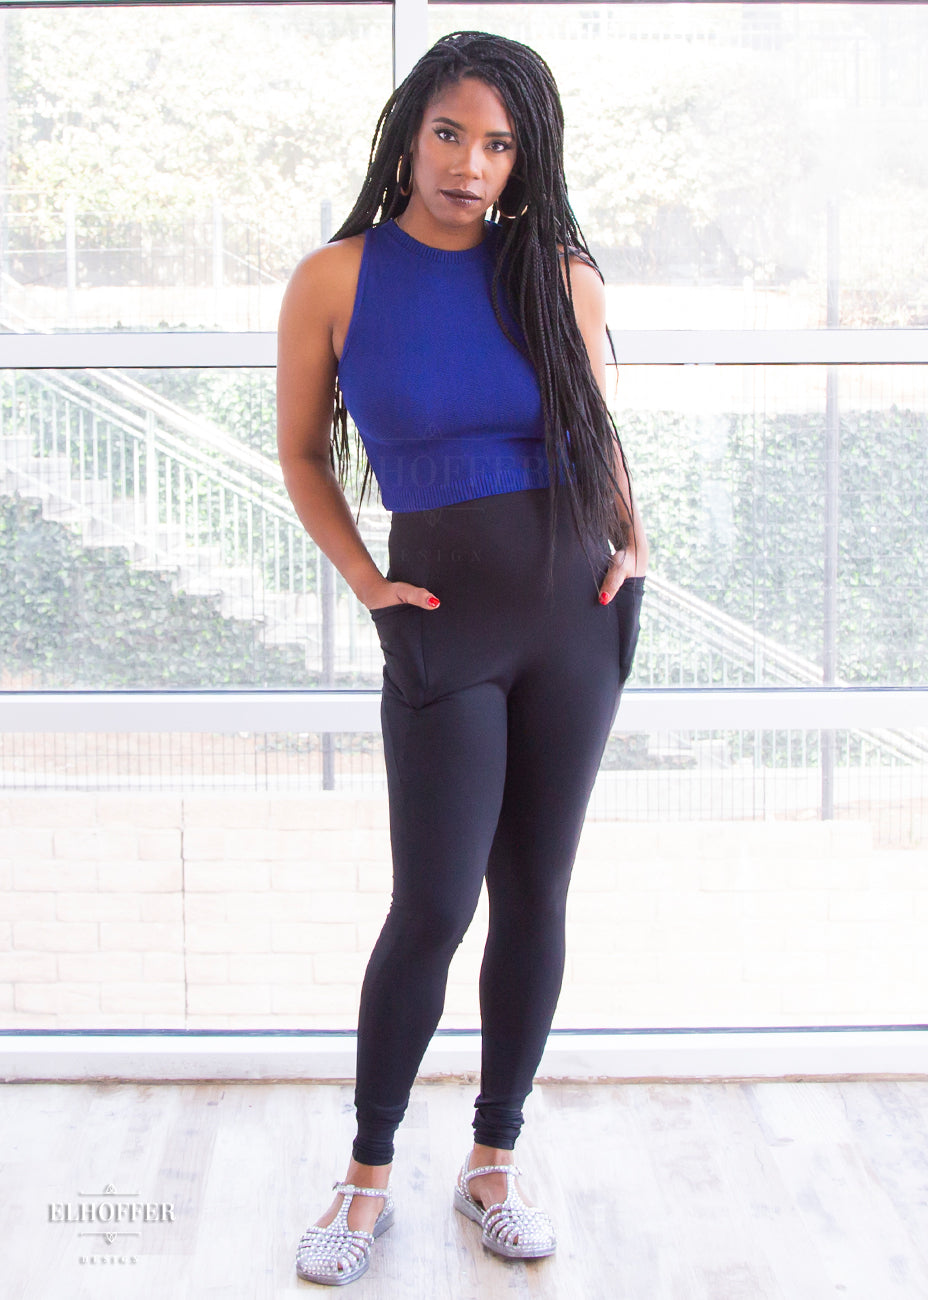 Krystina, a size small medium dark skinned model with long braids, is wearing a pair of high waisted black leggings with a seamless front and side seam pockets in black.